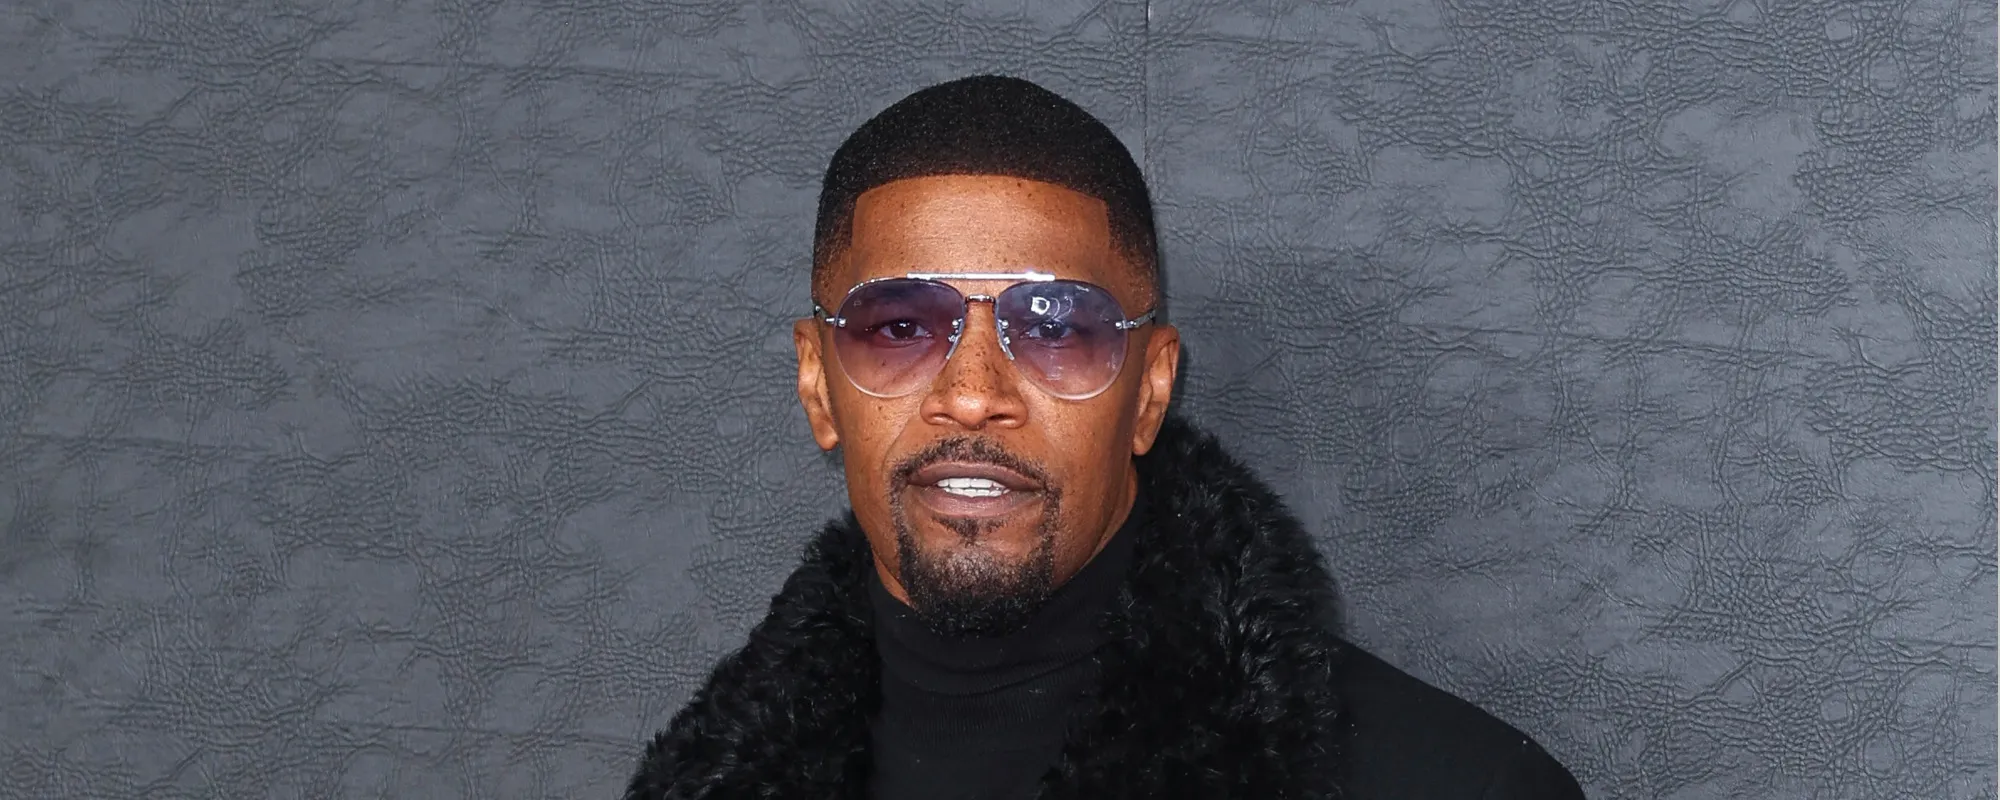 Jamie Foxx Shares Health Update: “I Went to Hell and Back”